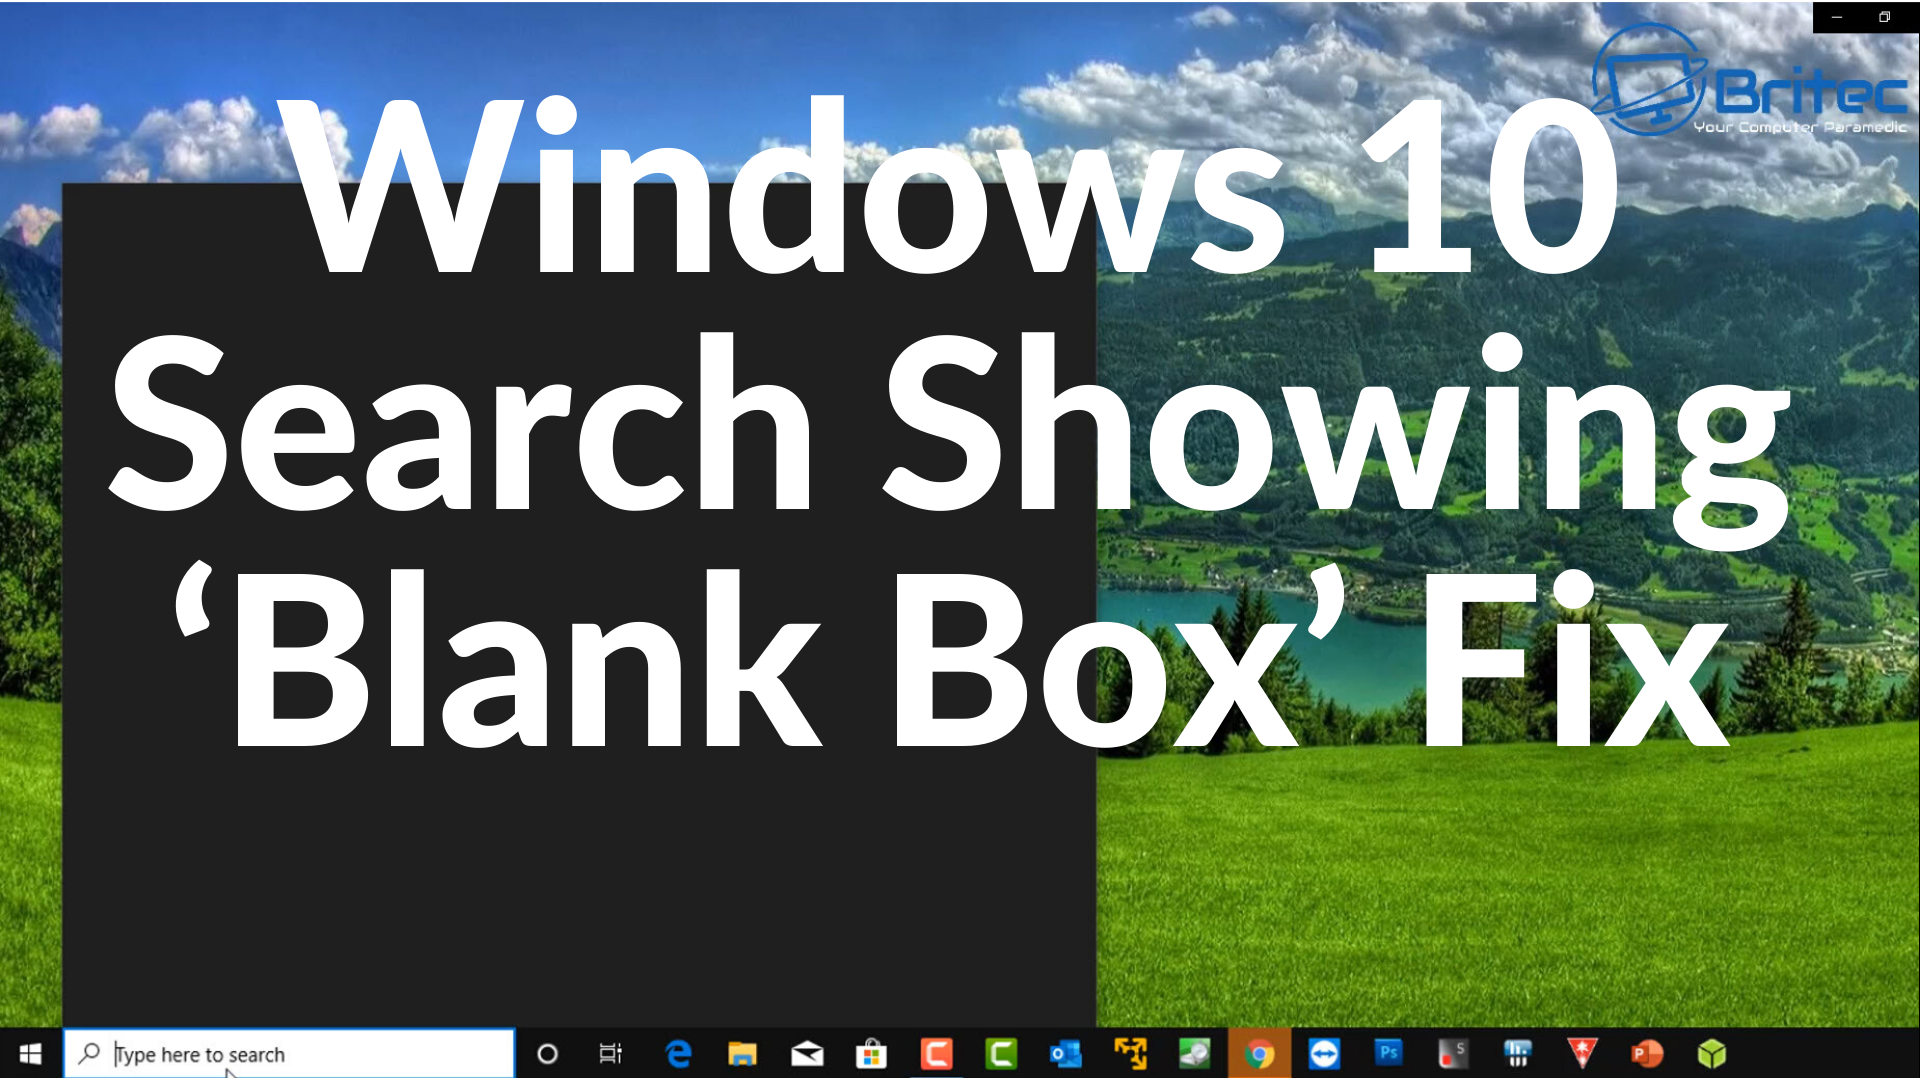 Windows 10 Search Showing 'Blank Box' Fix - Malware Removal, PC Repair and How-to Videos